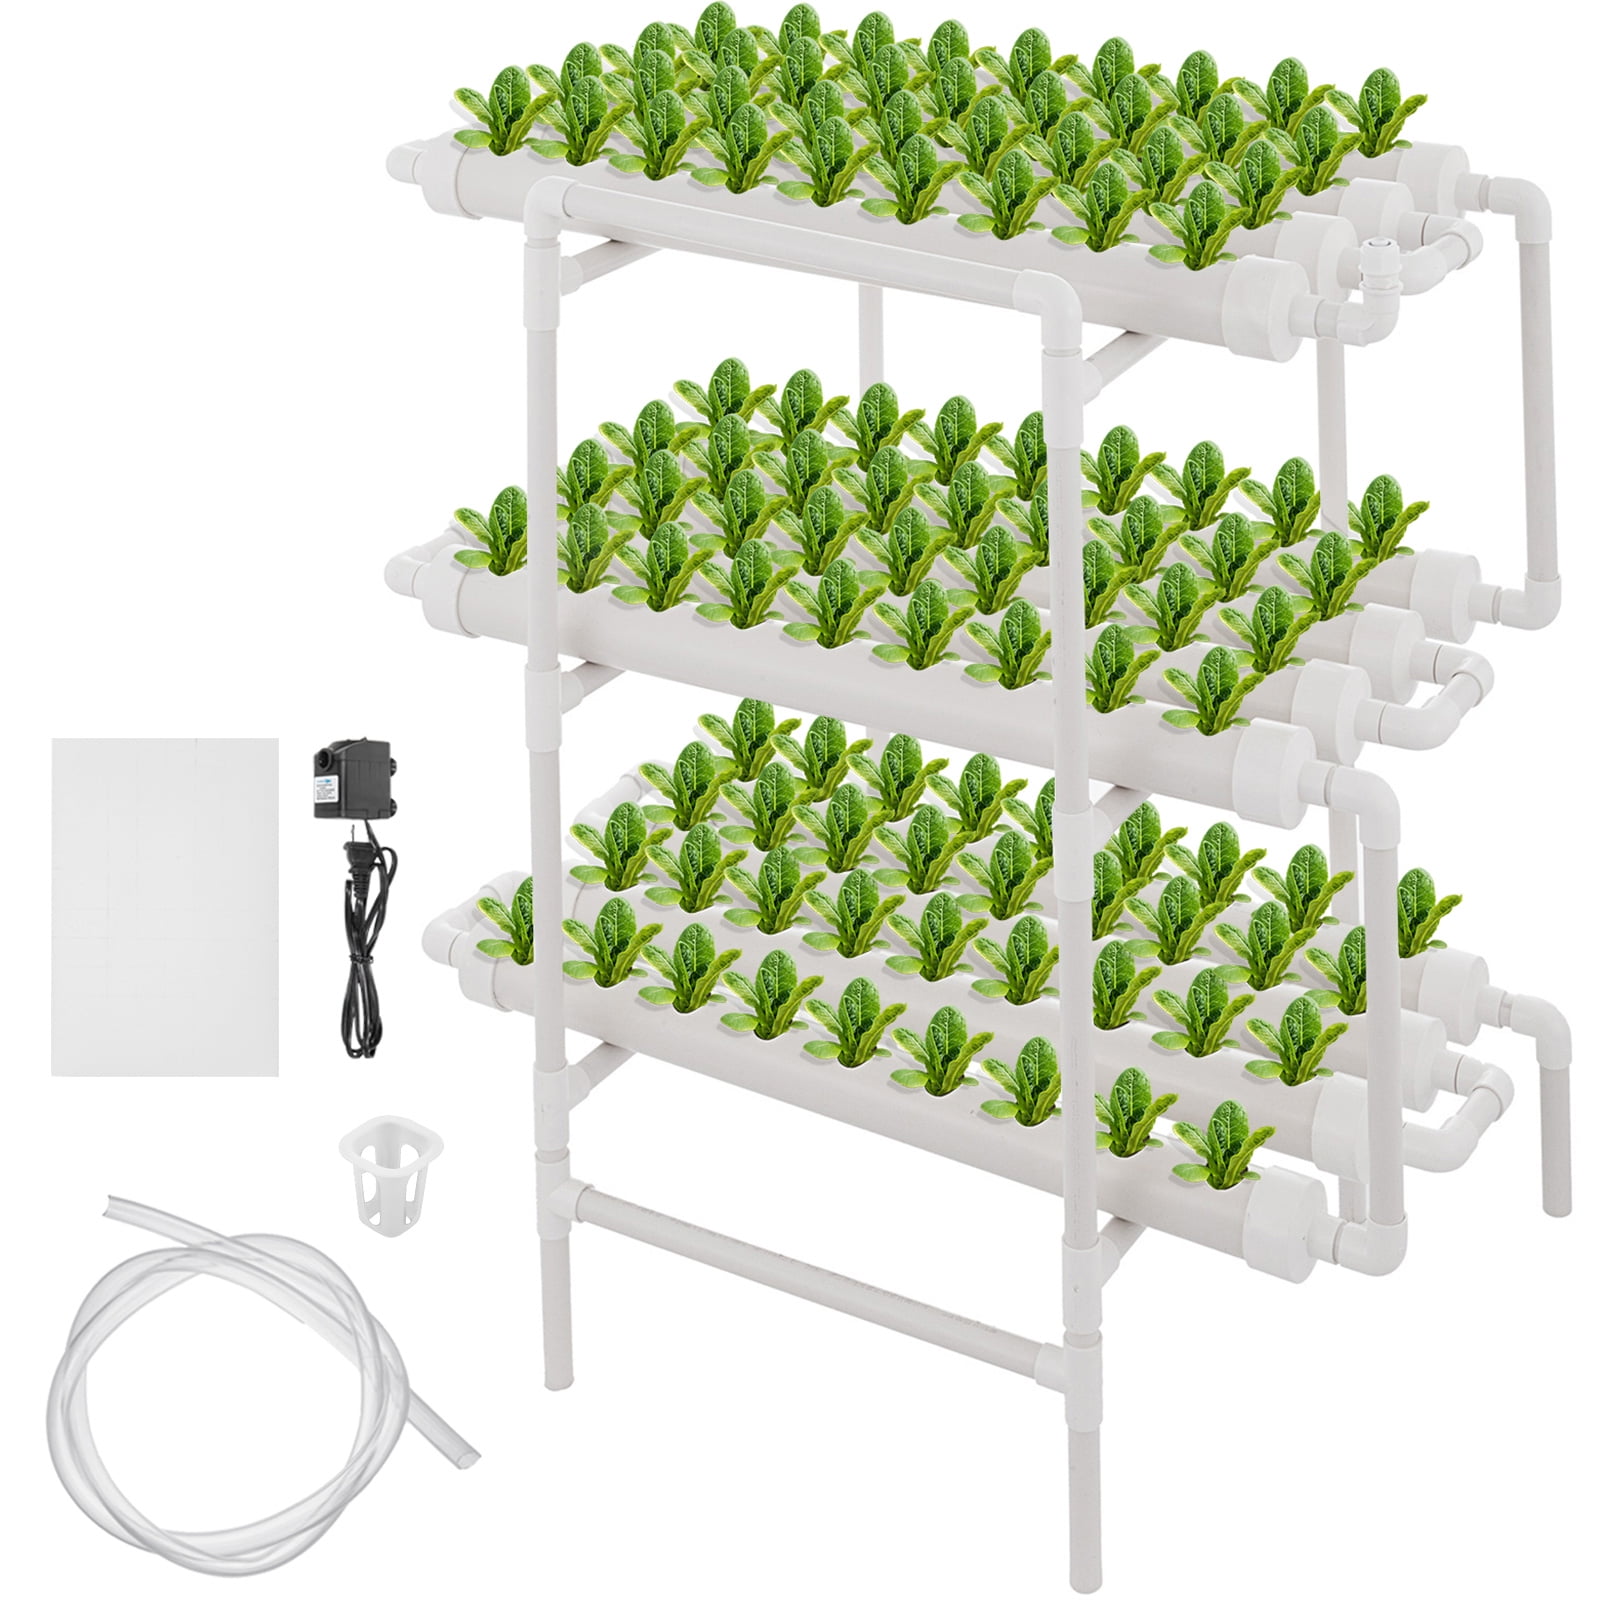 Hydroponic system Grow Kit 108 Plant Sites 3 layer Plant lettuce herb Vegetable 